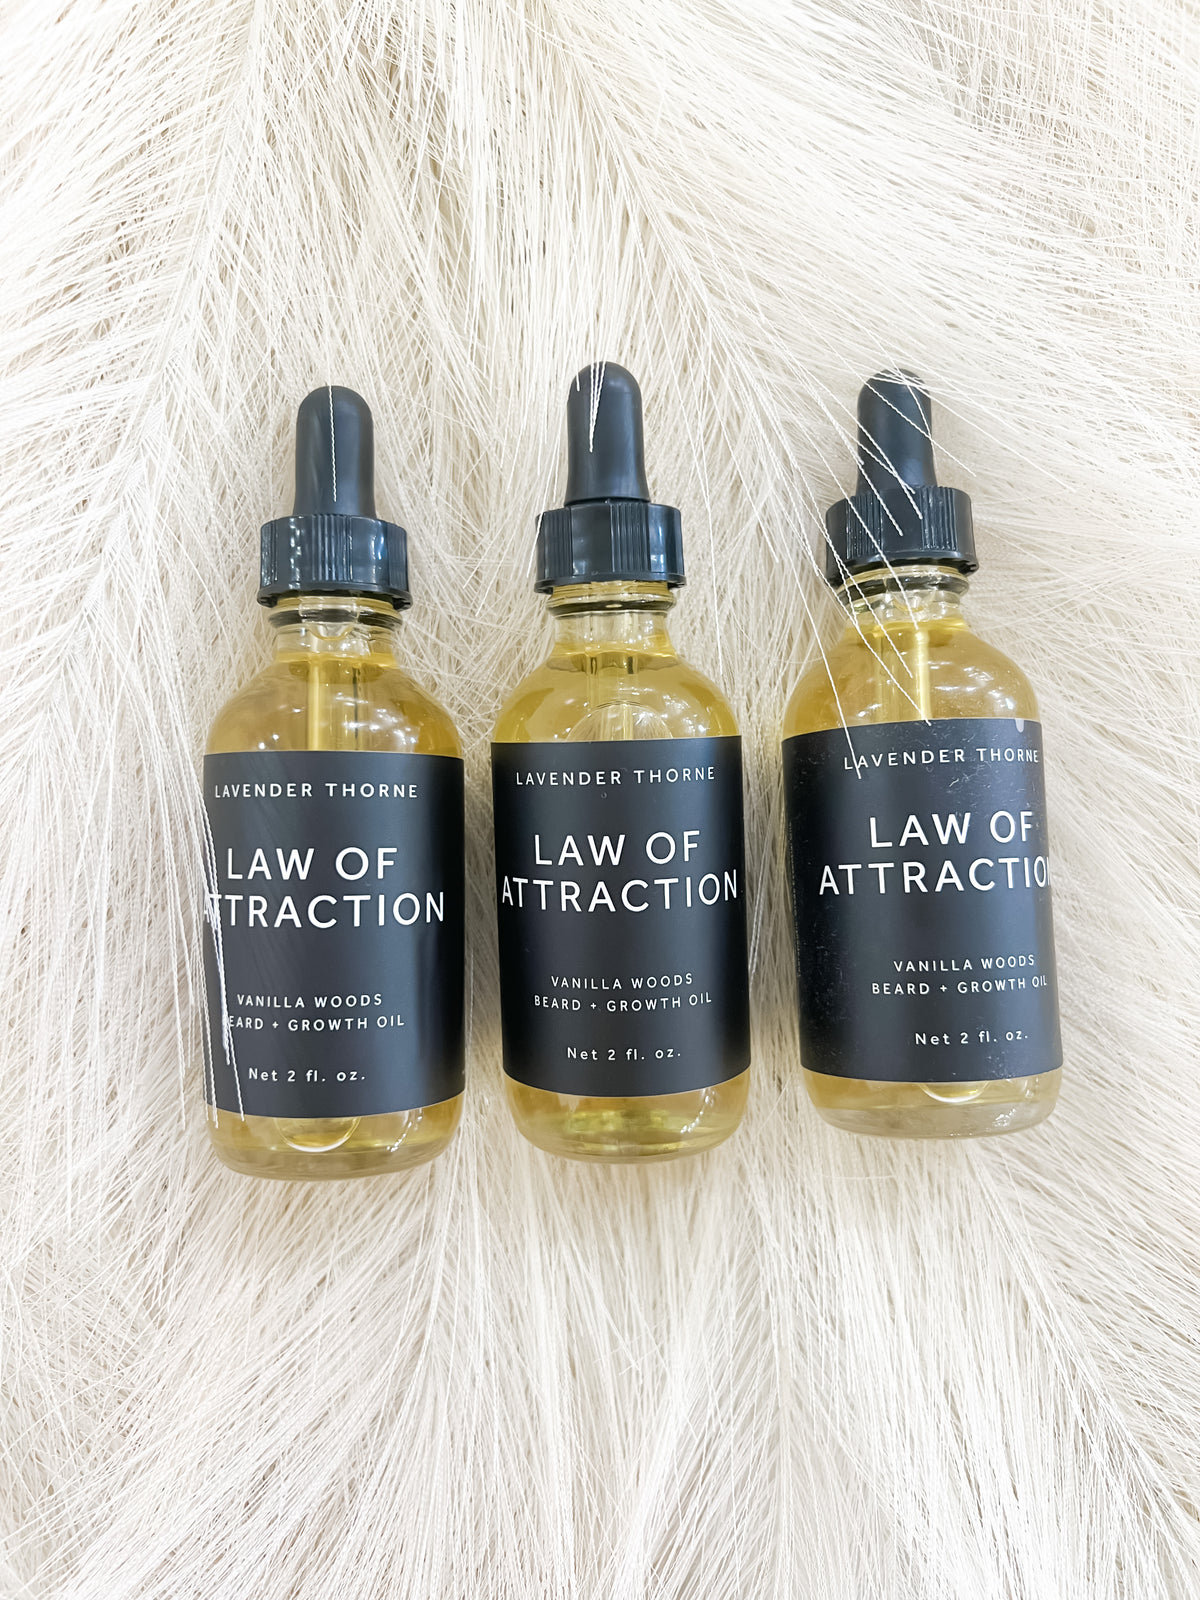 Law of Attraction Beard Oil